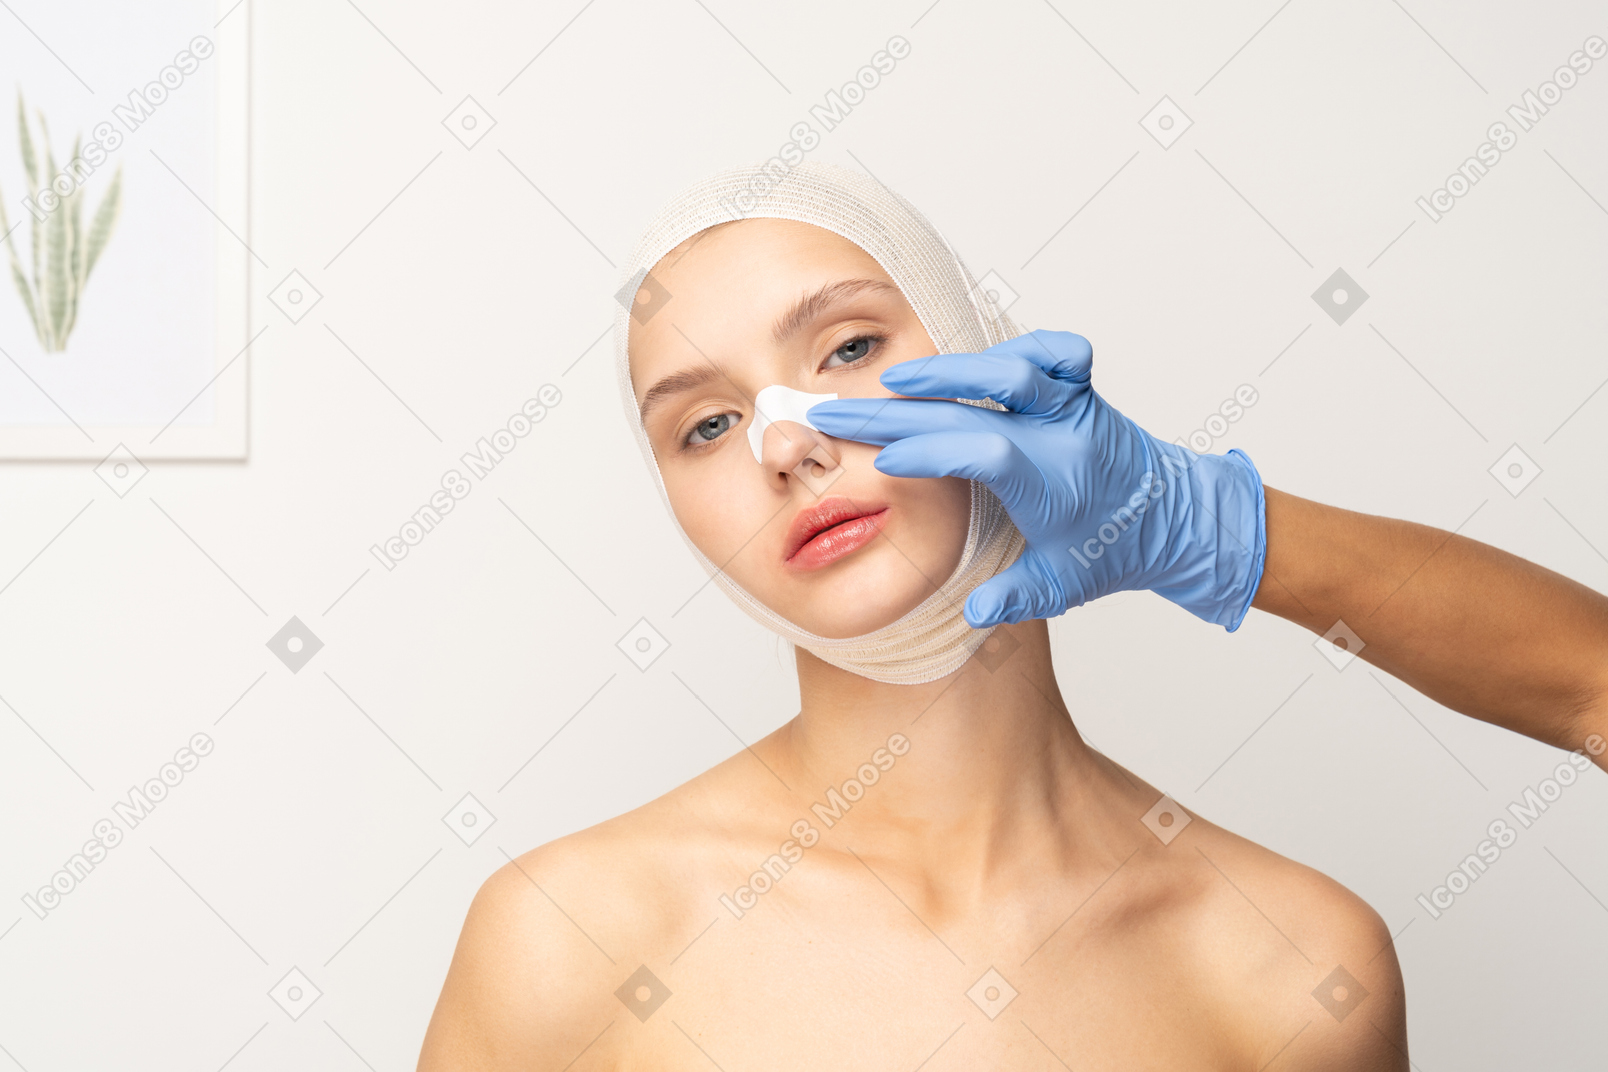 Female patient with hand putting a band aid on her nose